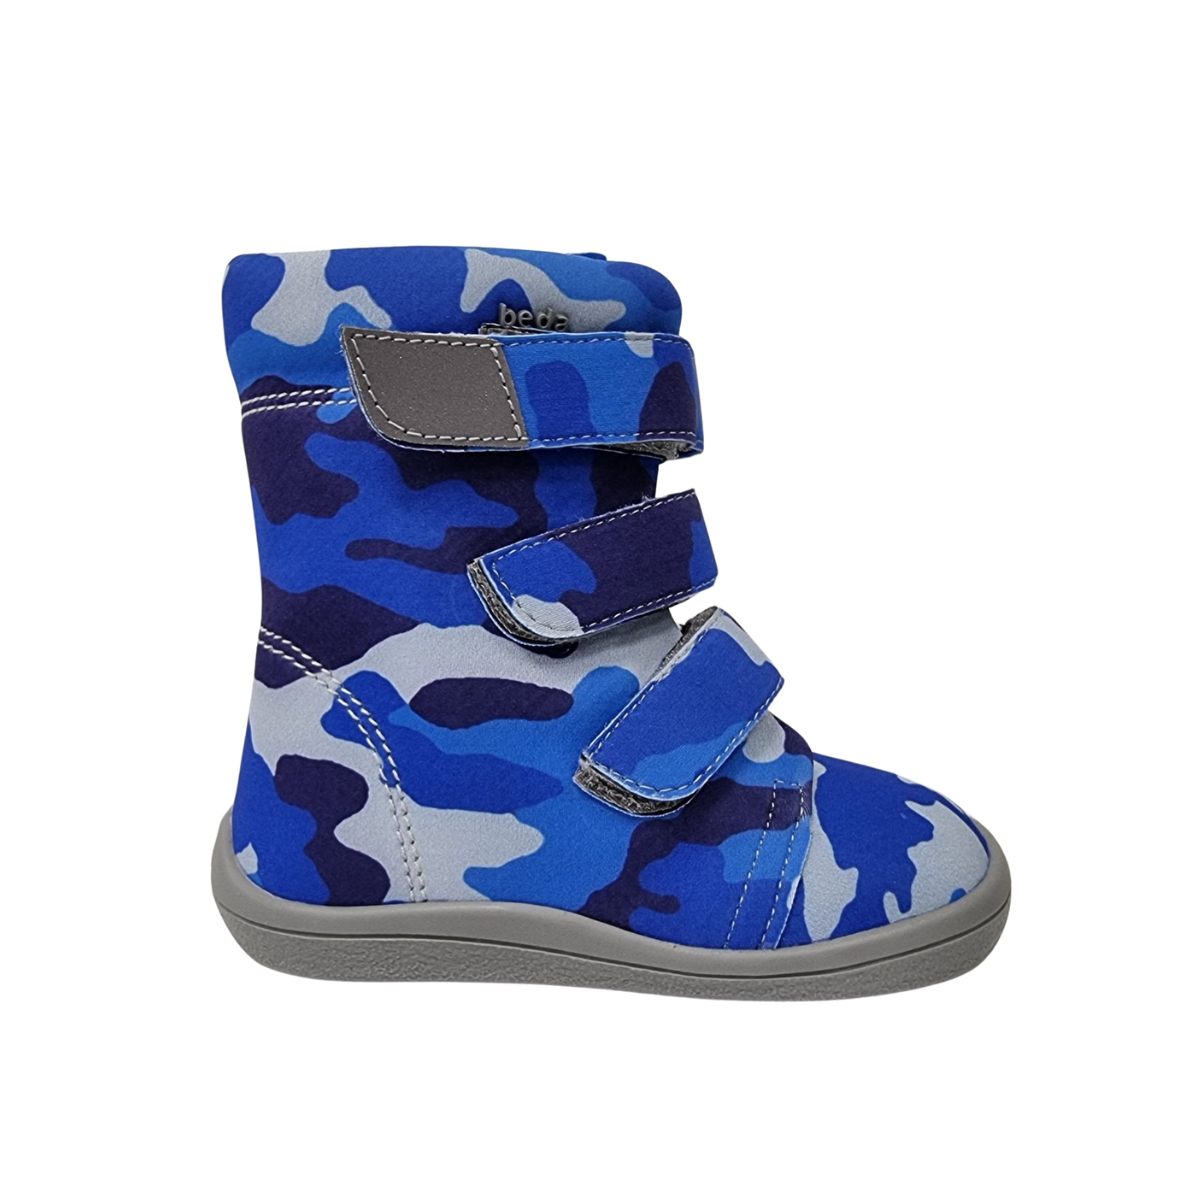 Barefoot Beda Barefoot - high winter boots with membrane military blue